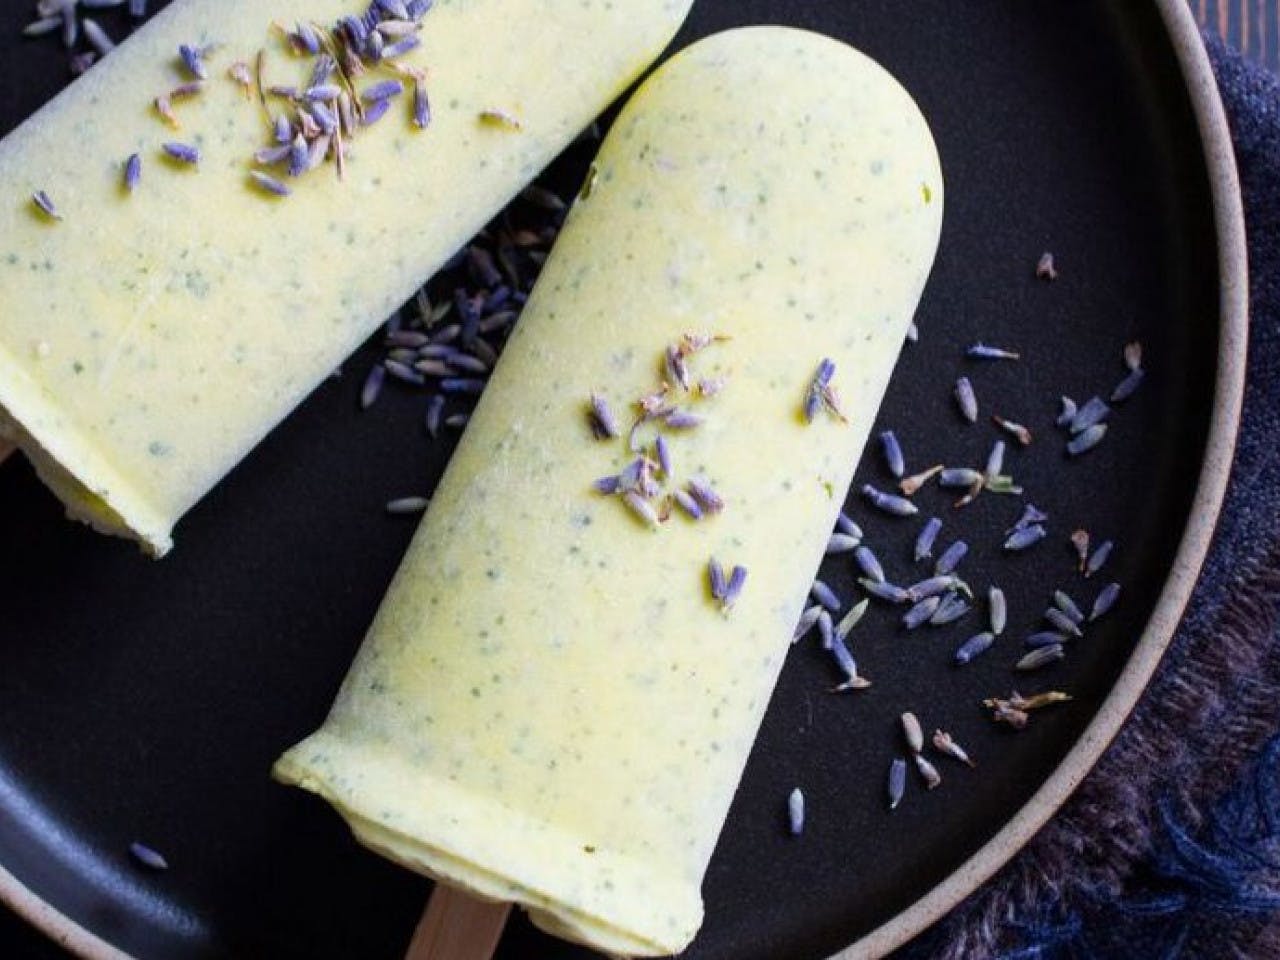 Mango ice cream with lavender and mint